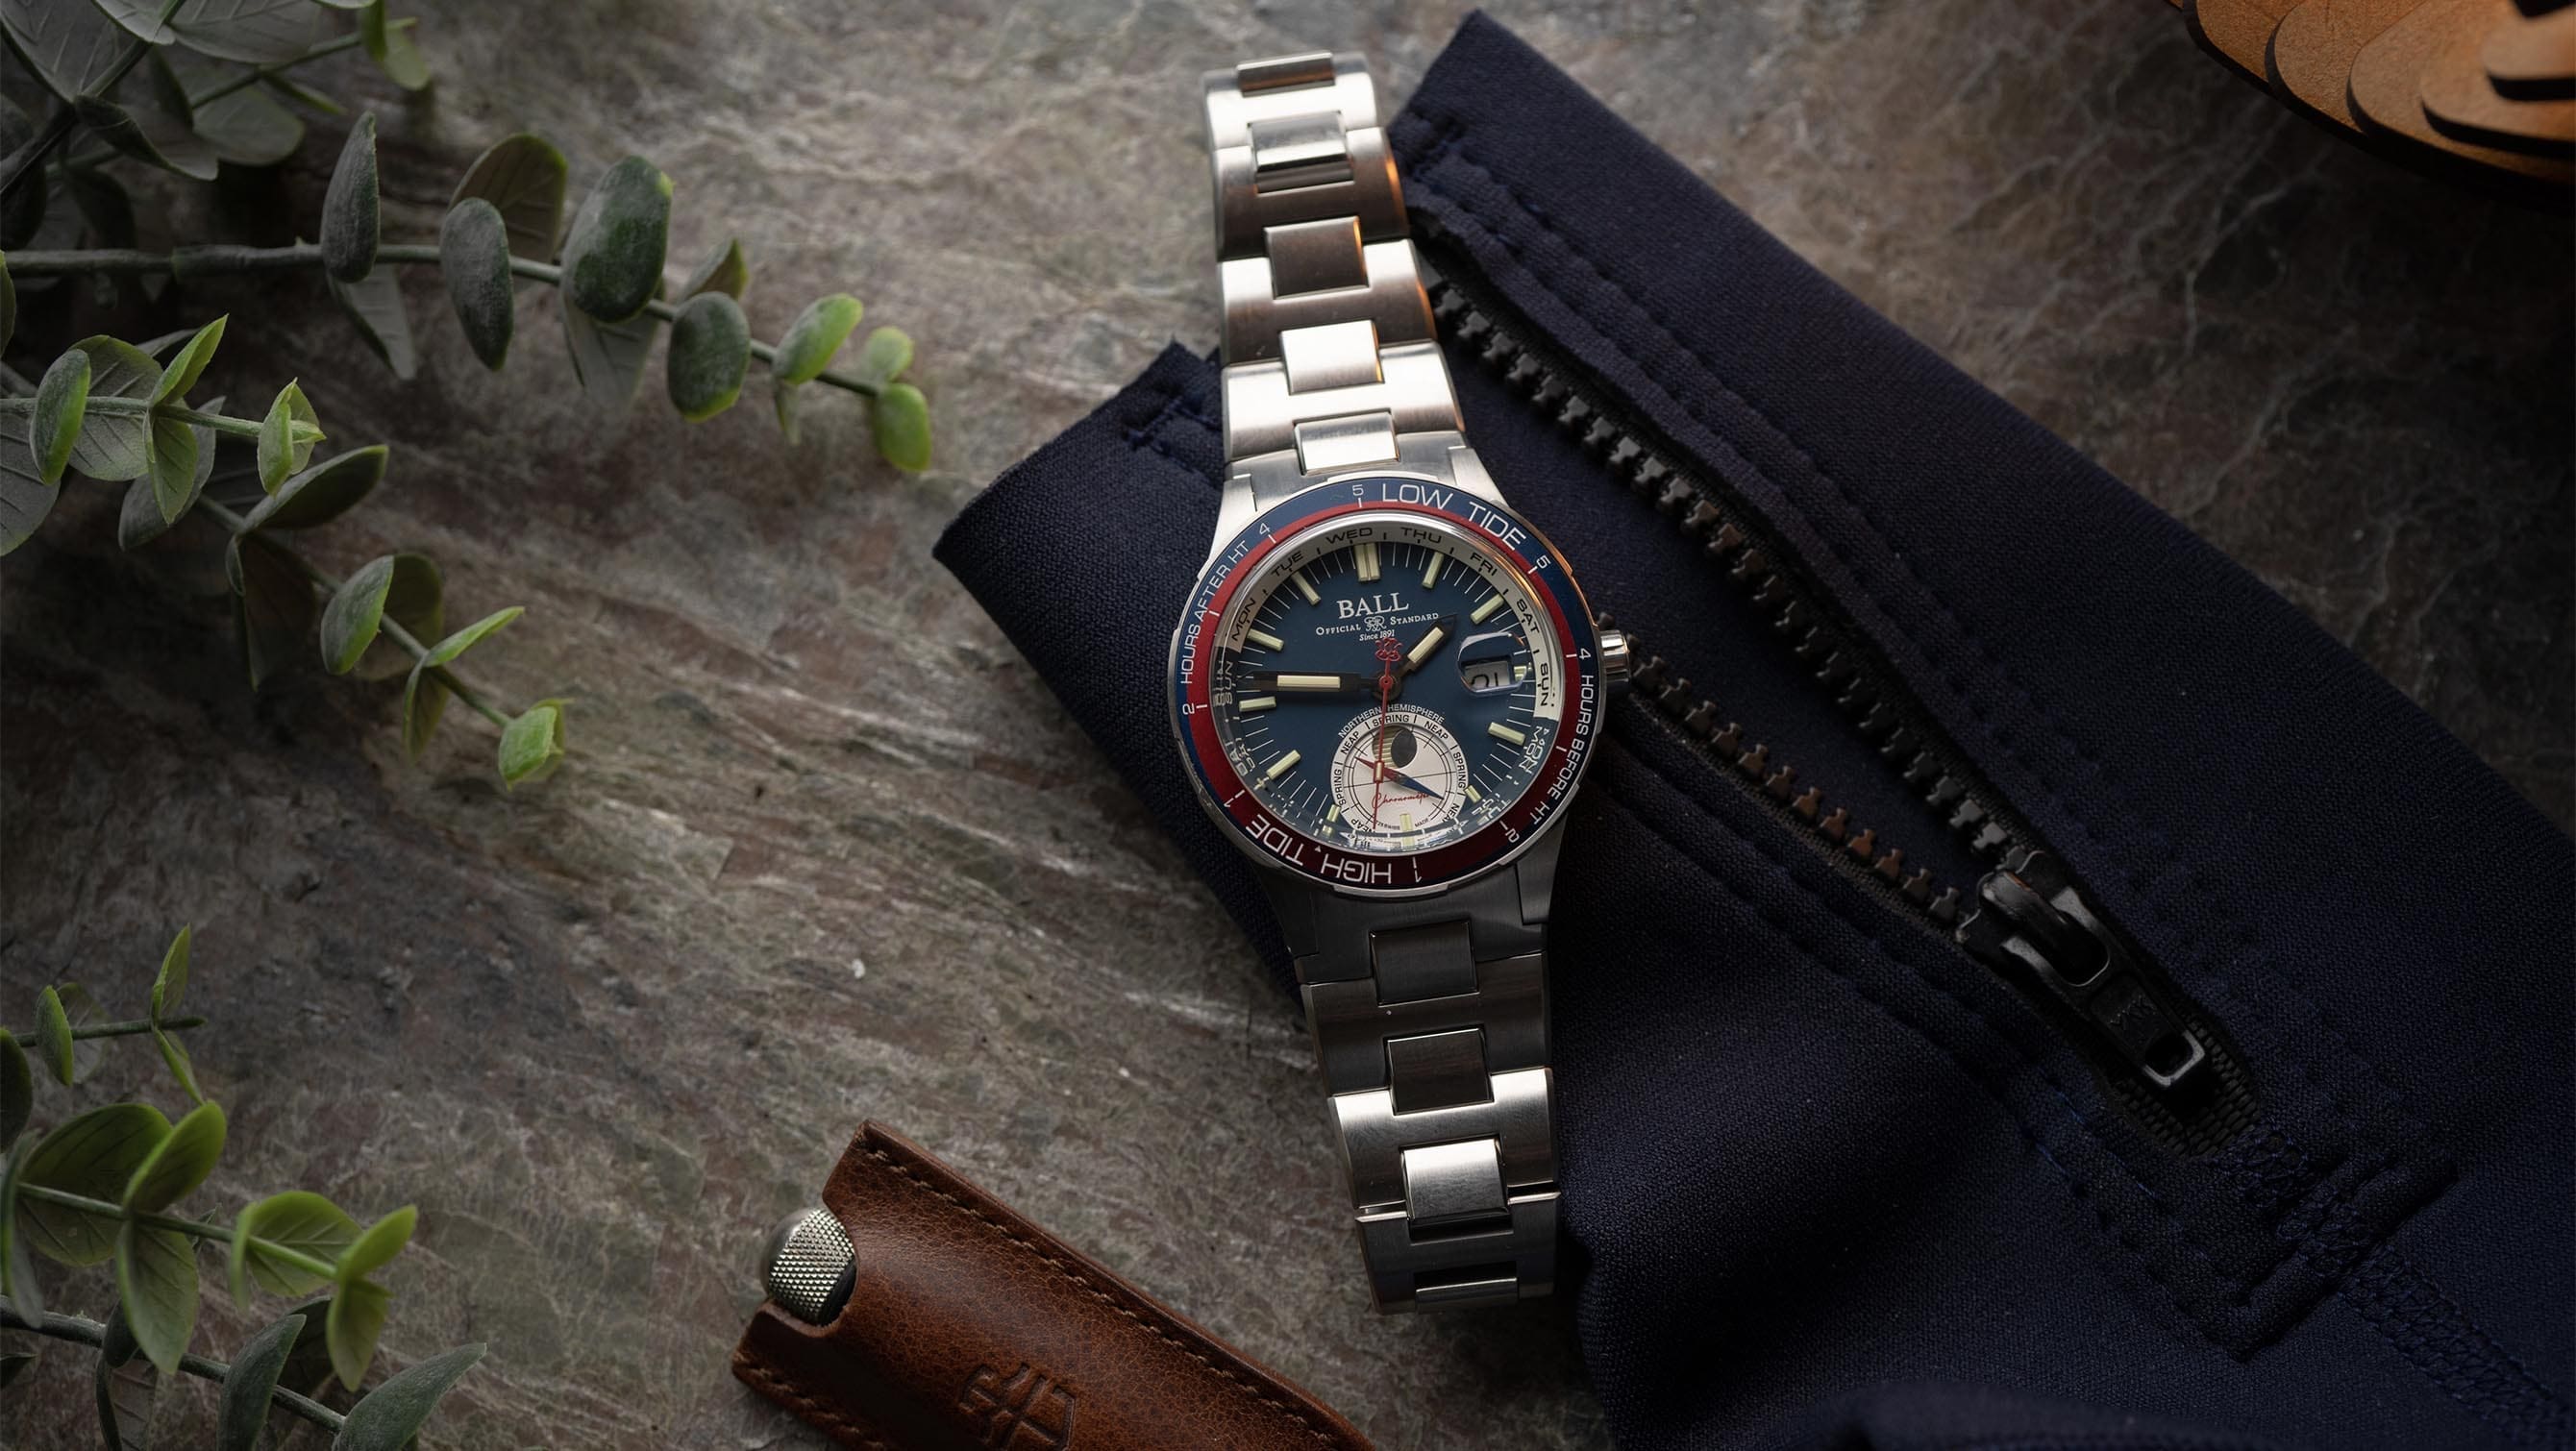 The Ball Roadmaster Ocean Explorer blends nautical utility with strong all-round specifications